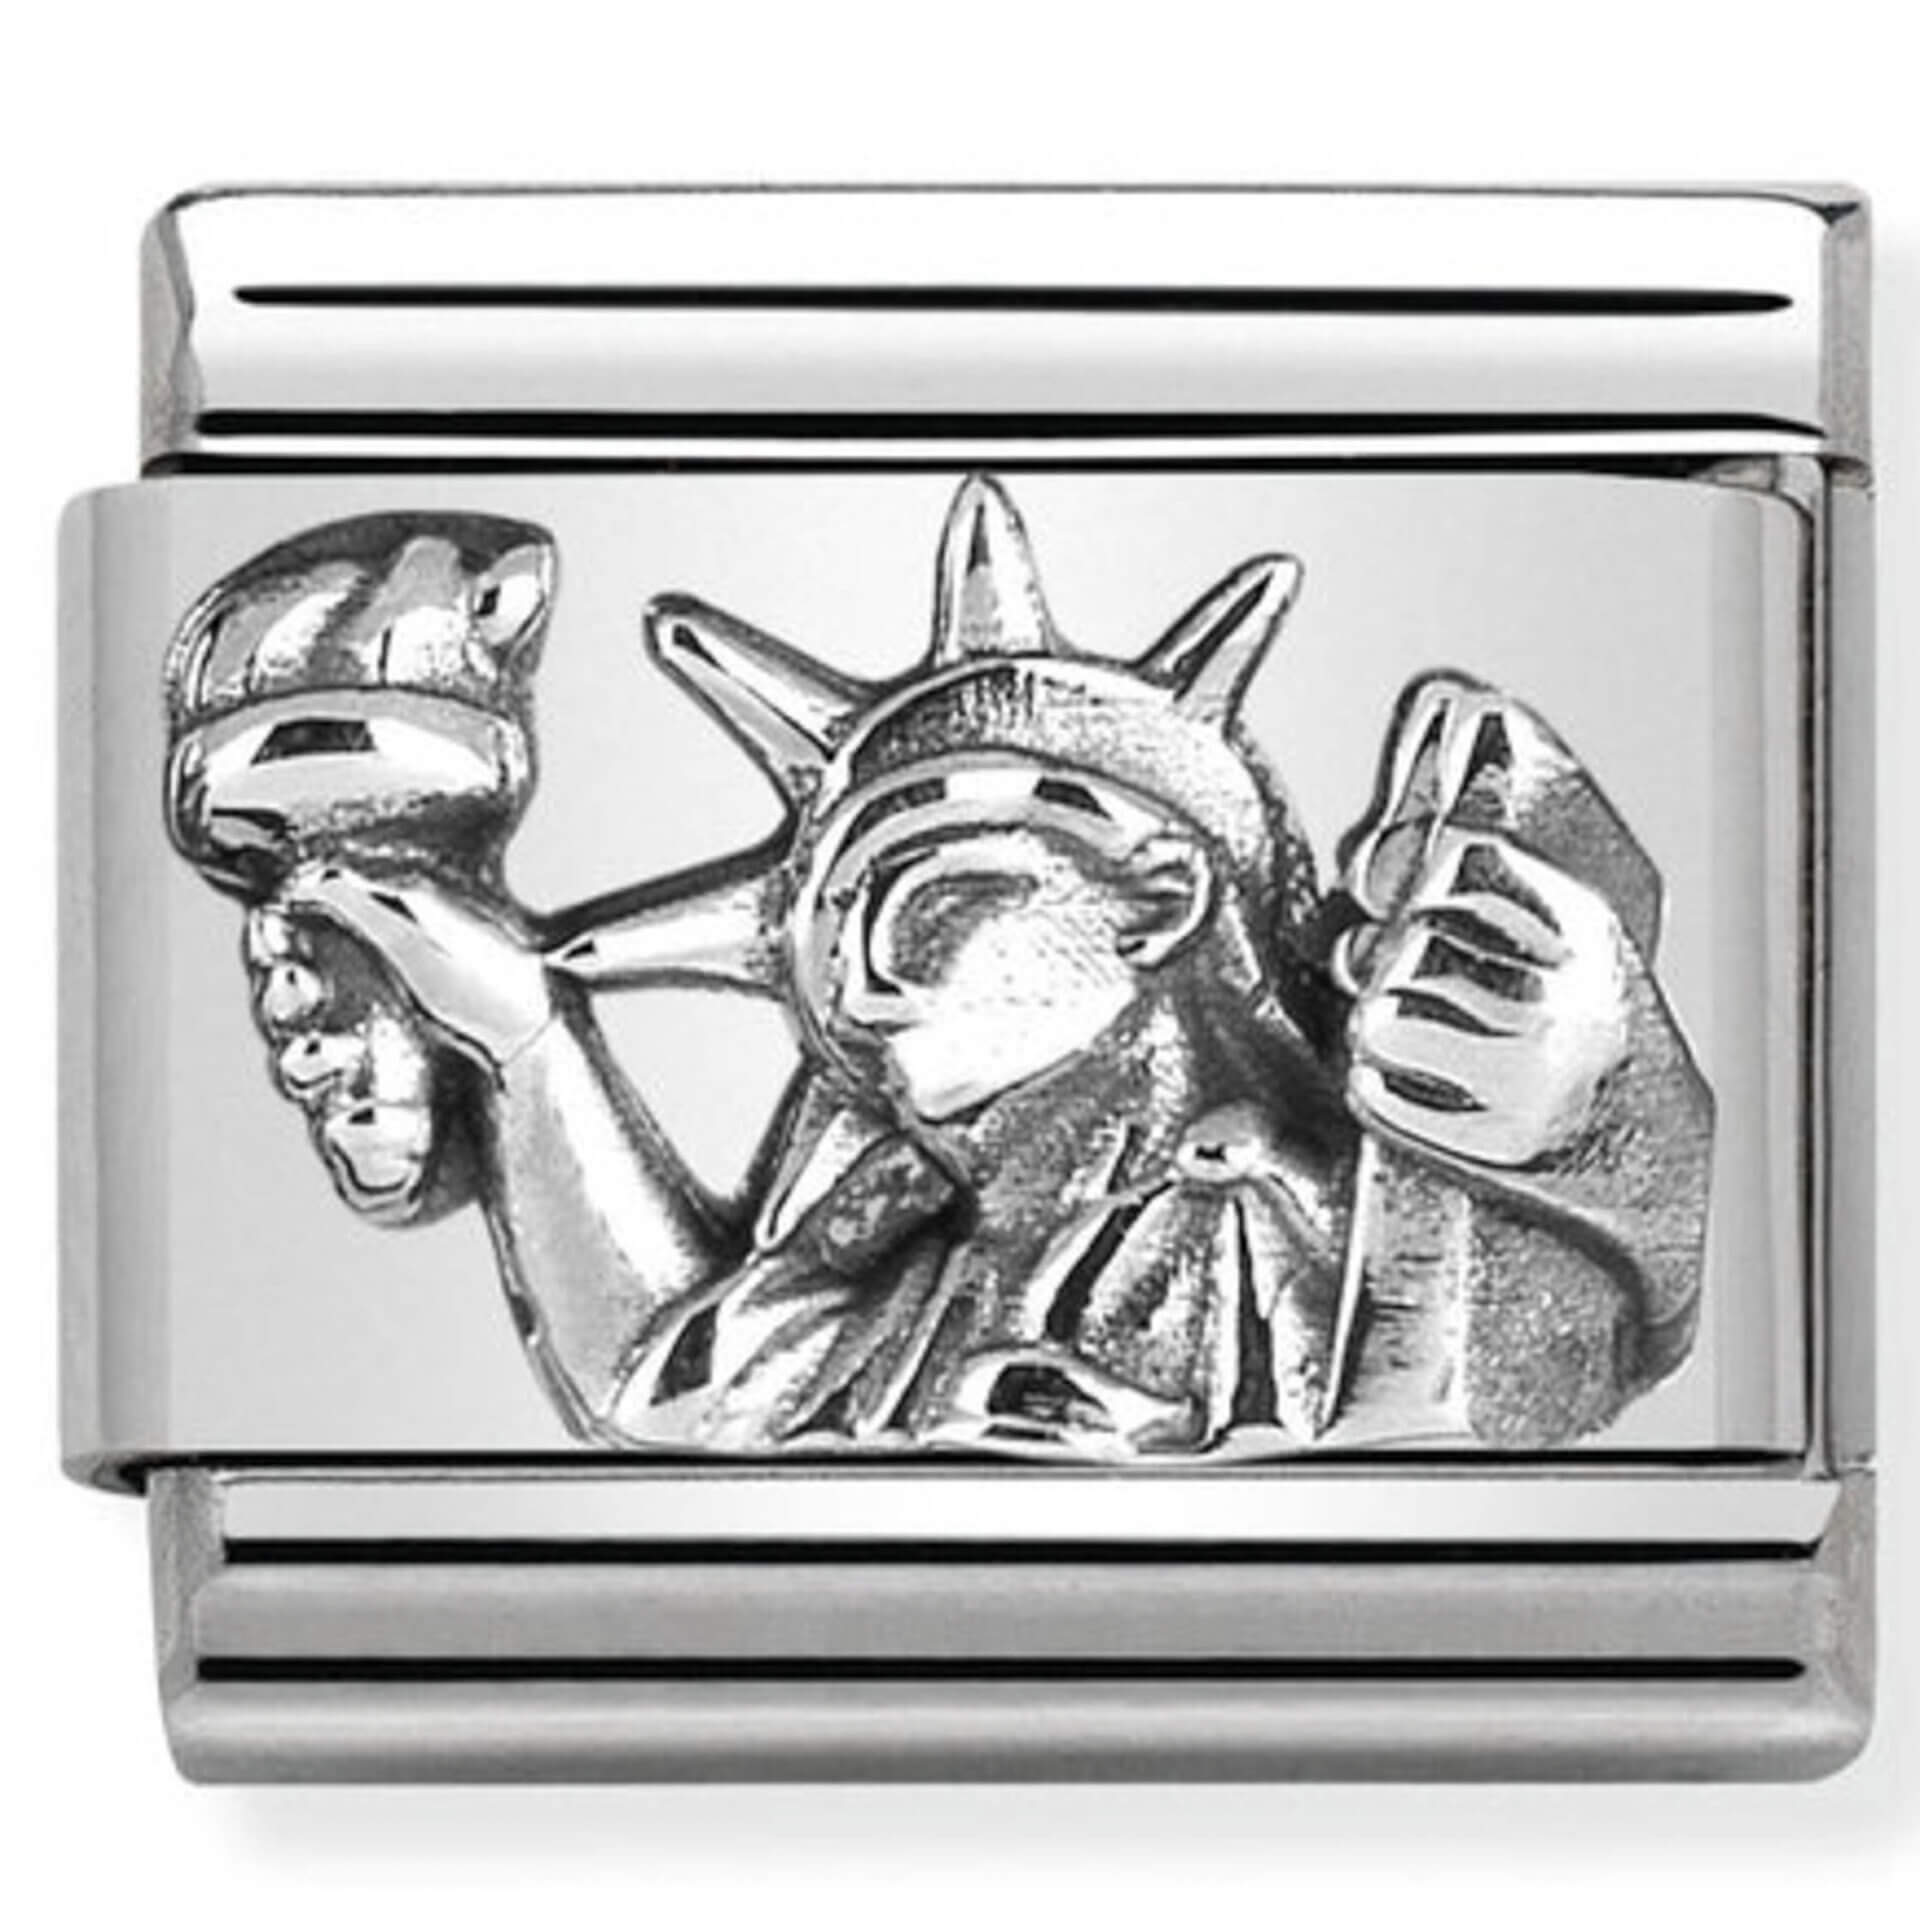 Nomination Silver Statue of Liberty